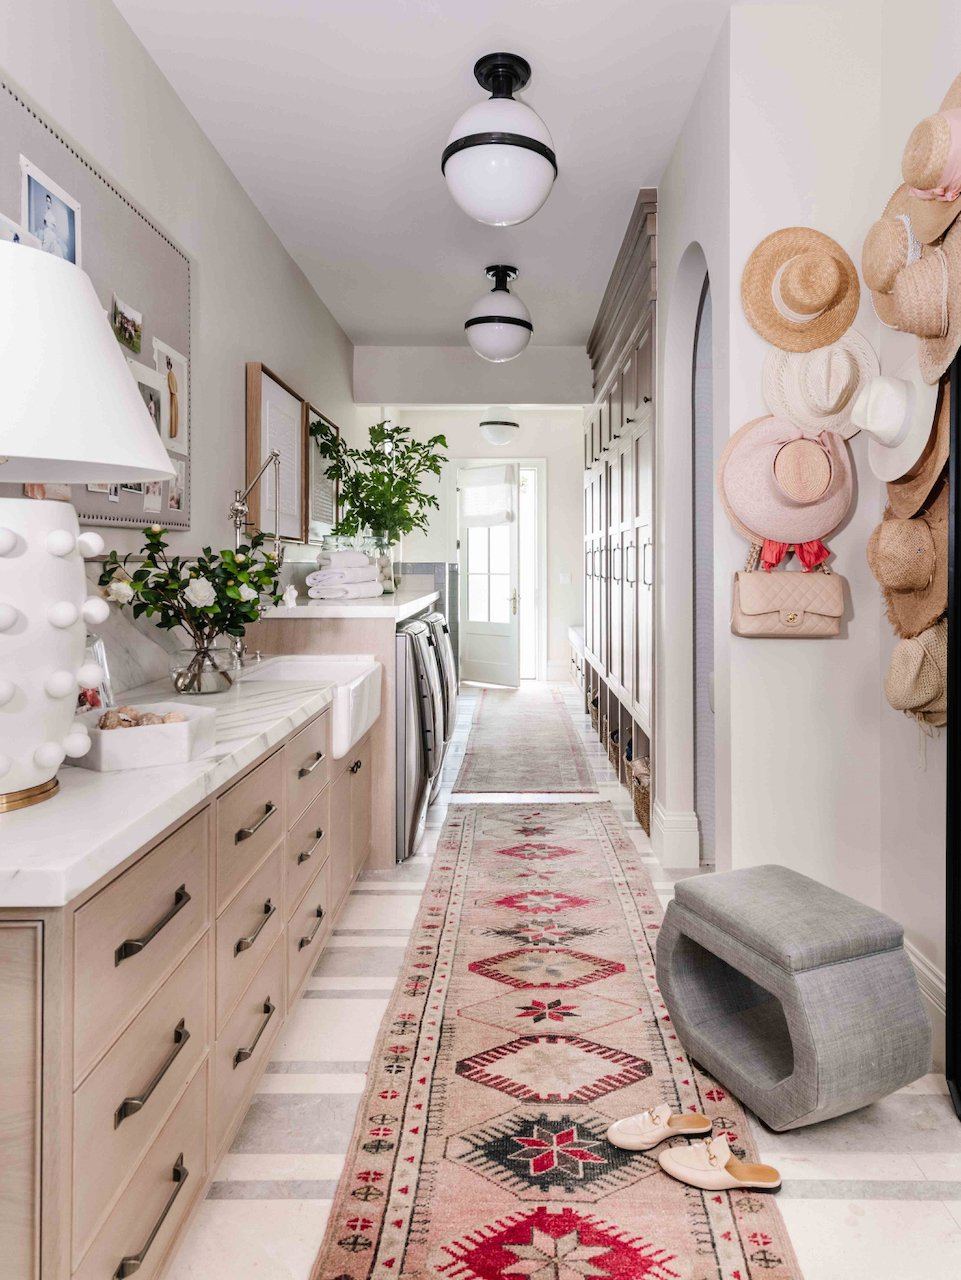 My Mudroom Reveal with Alice Lane – Rachel Parcell, Inc.